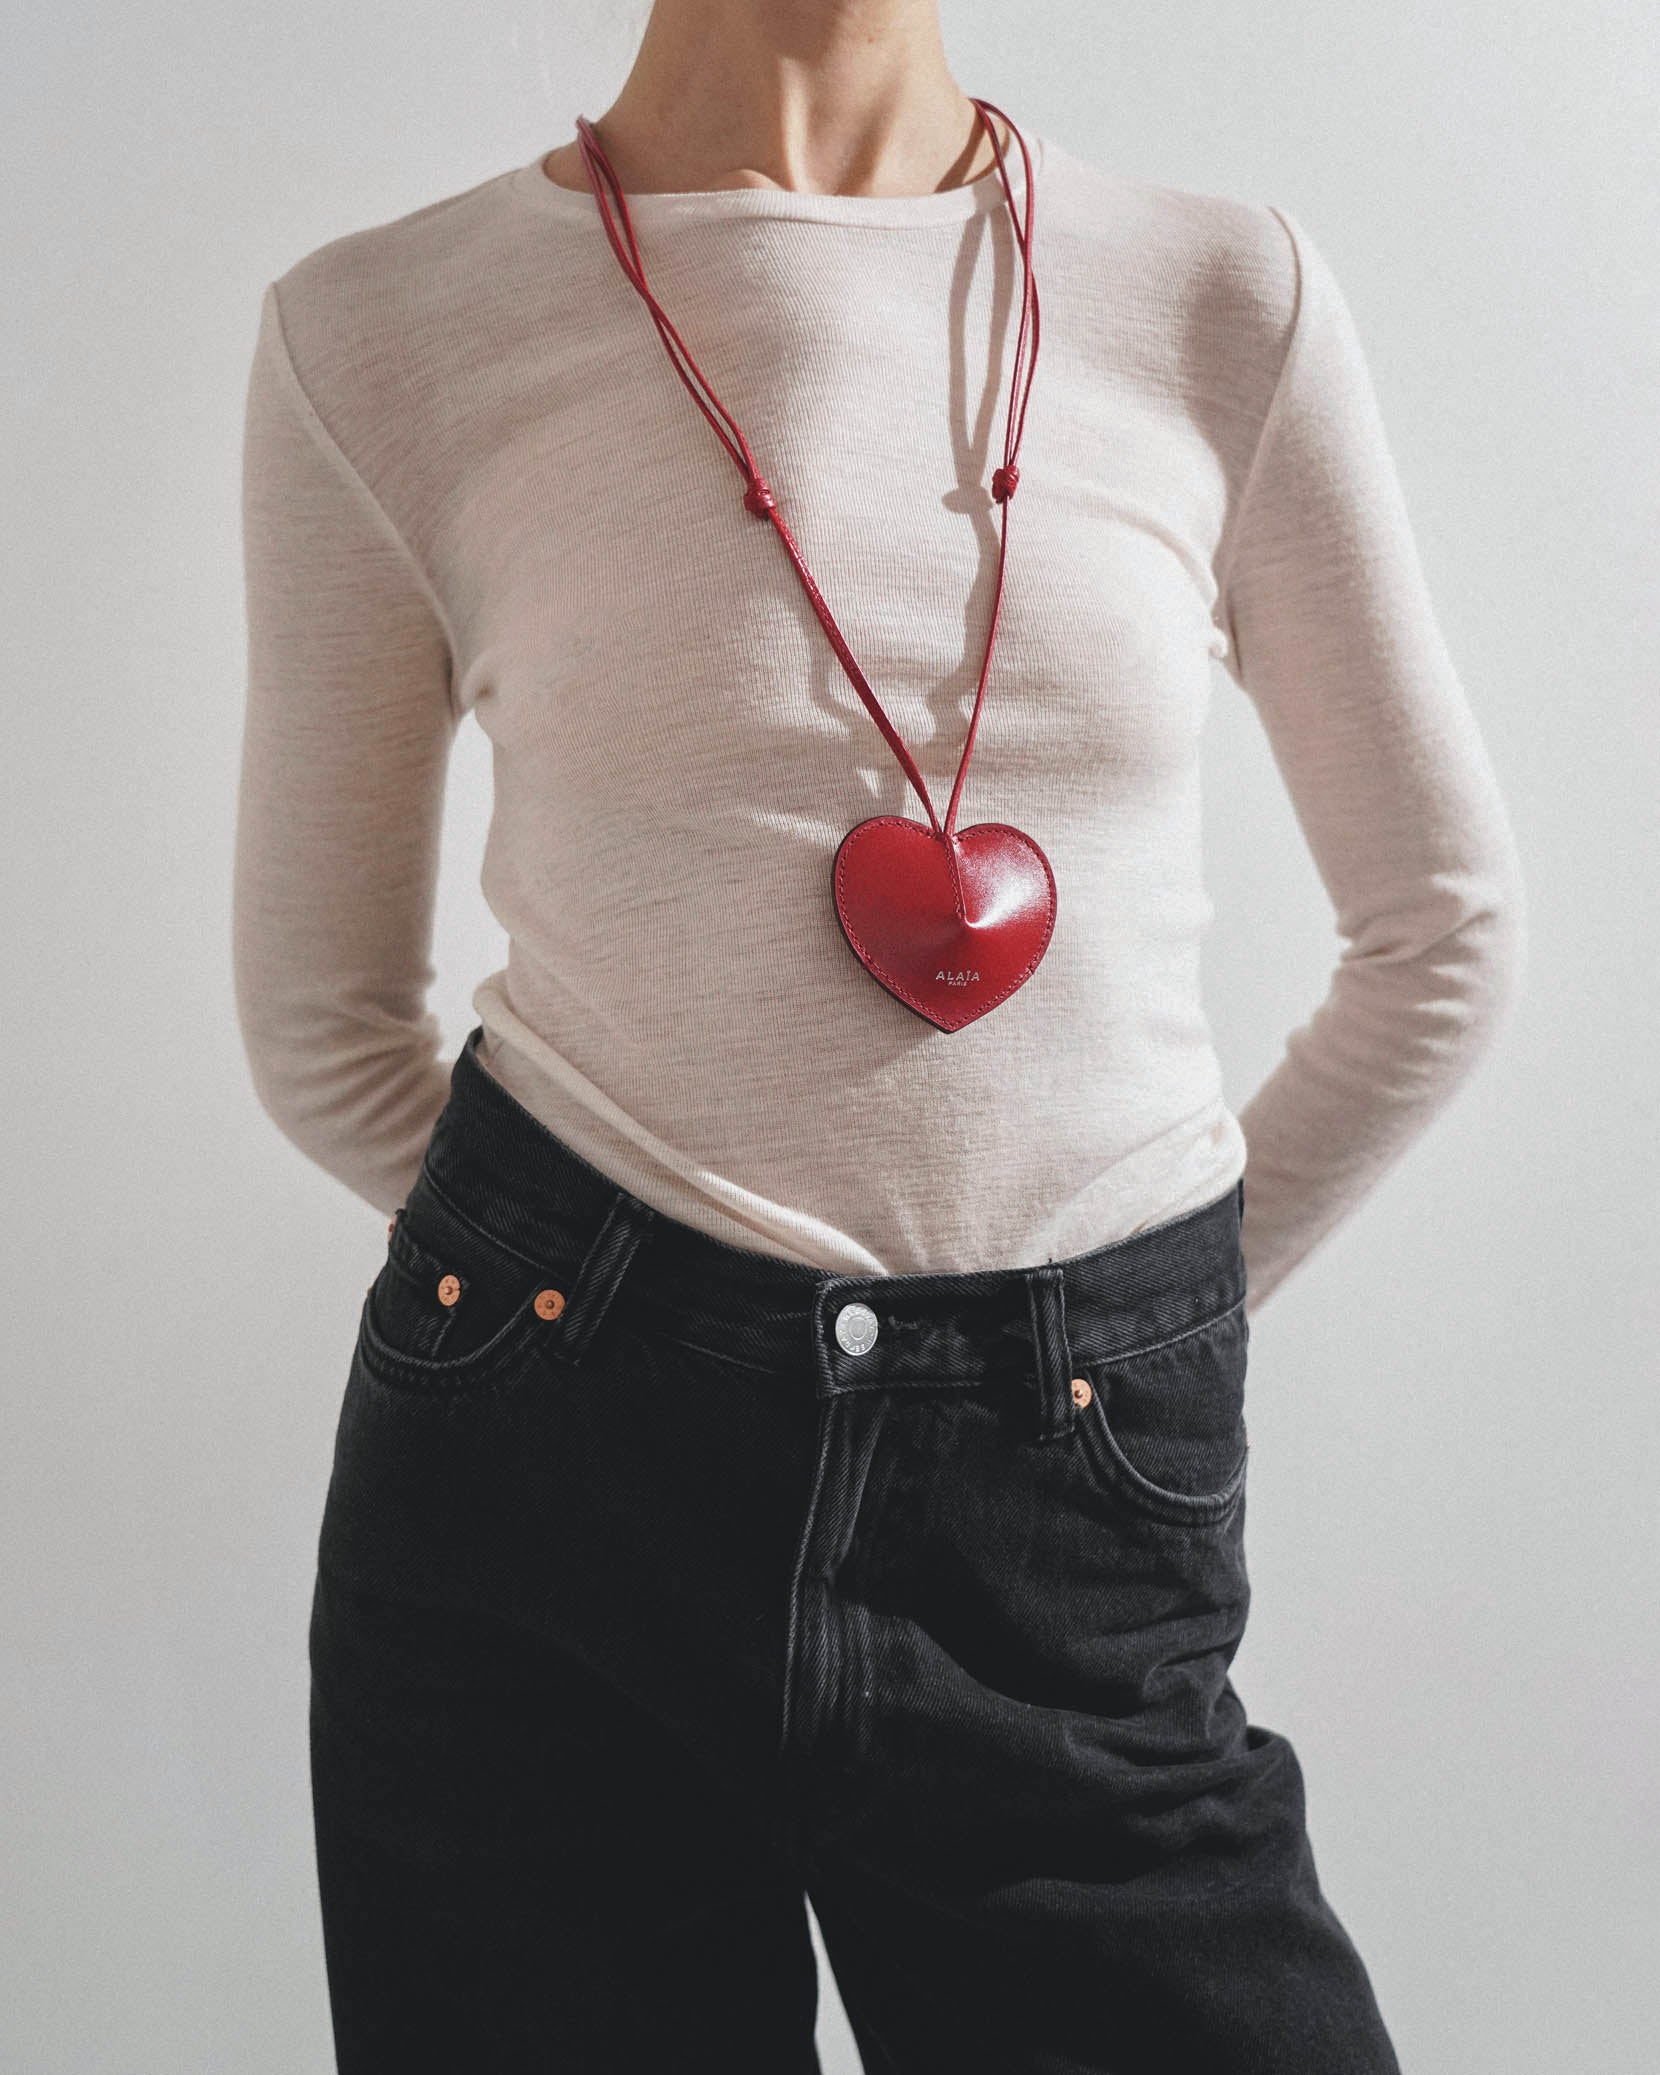 Le Coeur Cloche red leather